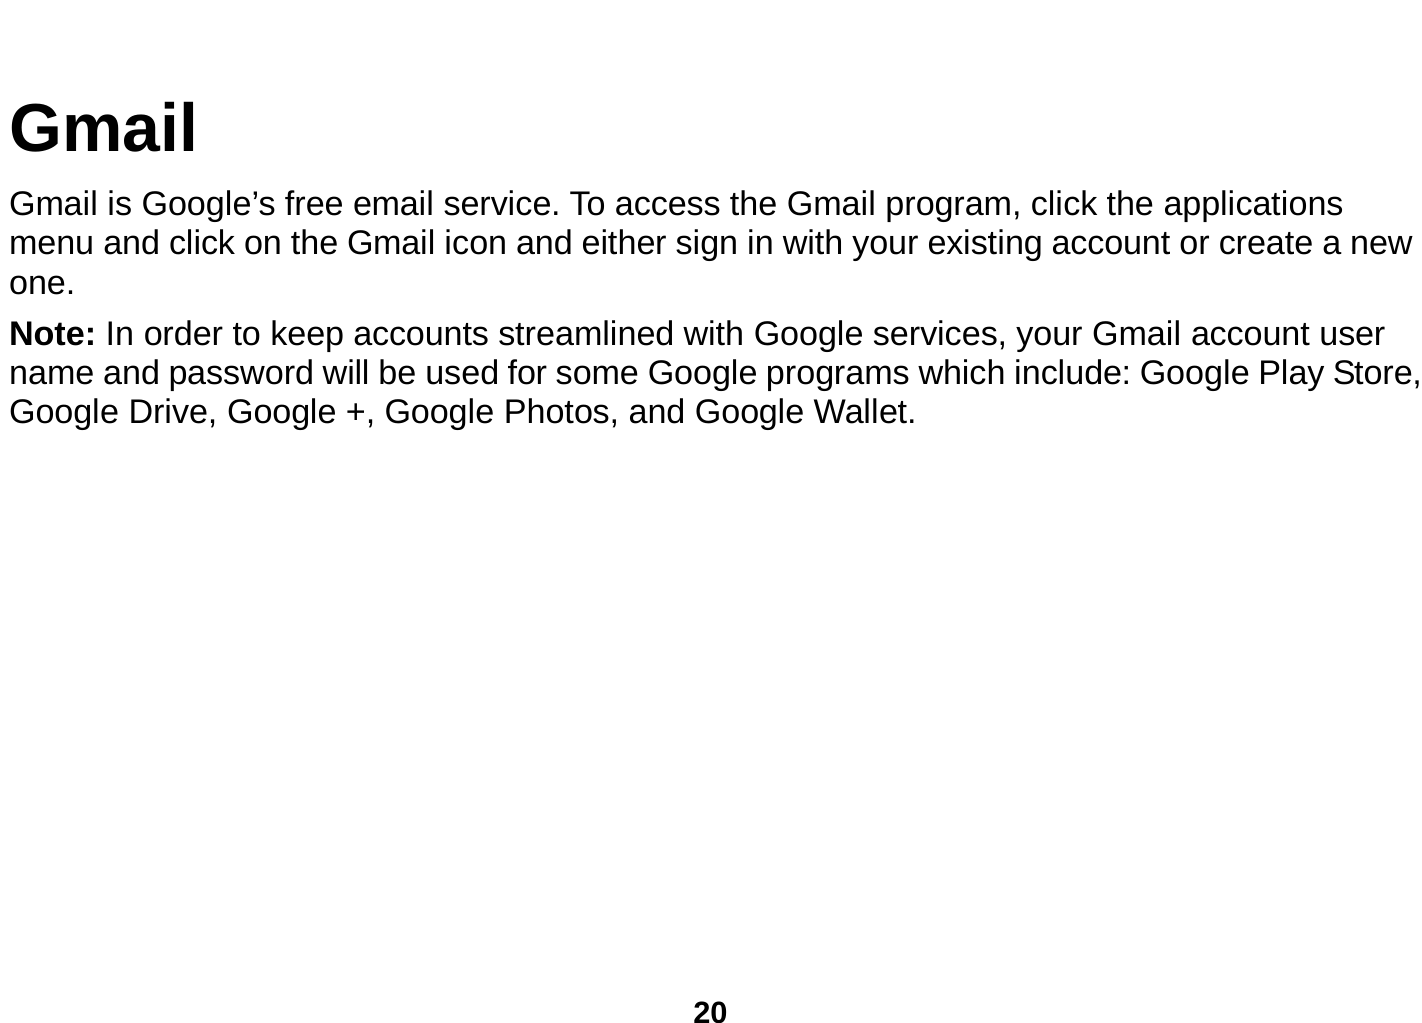  20  Gmail Gmail is Google’s free email service. To access the Gmail program, click the applications menu and click on the Gmail icon and either sign in with your existing account or create a new one.  Note: In order to keep accounts streamlined with Google services, your Gmail account user name and password will be used for some Google programs which include: Google Play Store, Google Drive, Google +, Google Photos, and Google Wallet. 